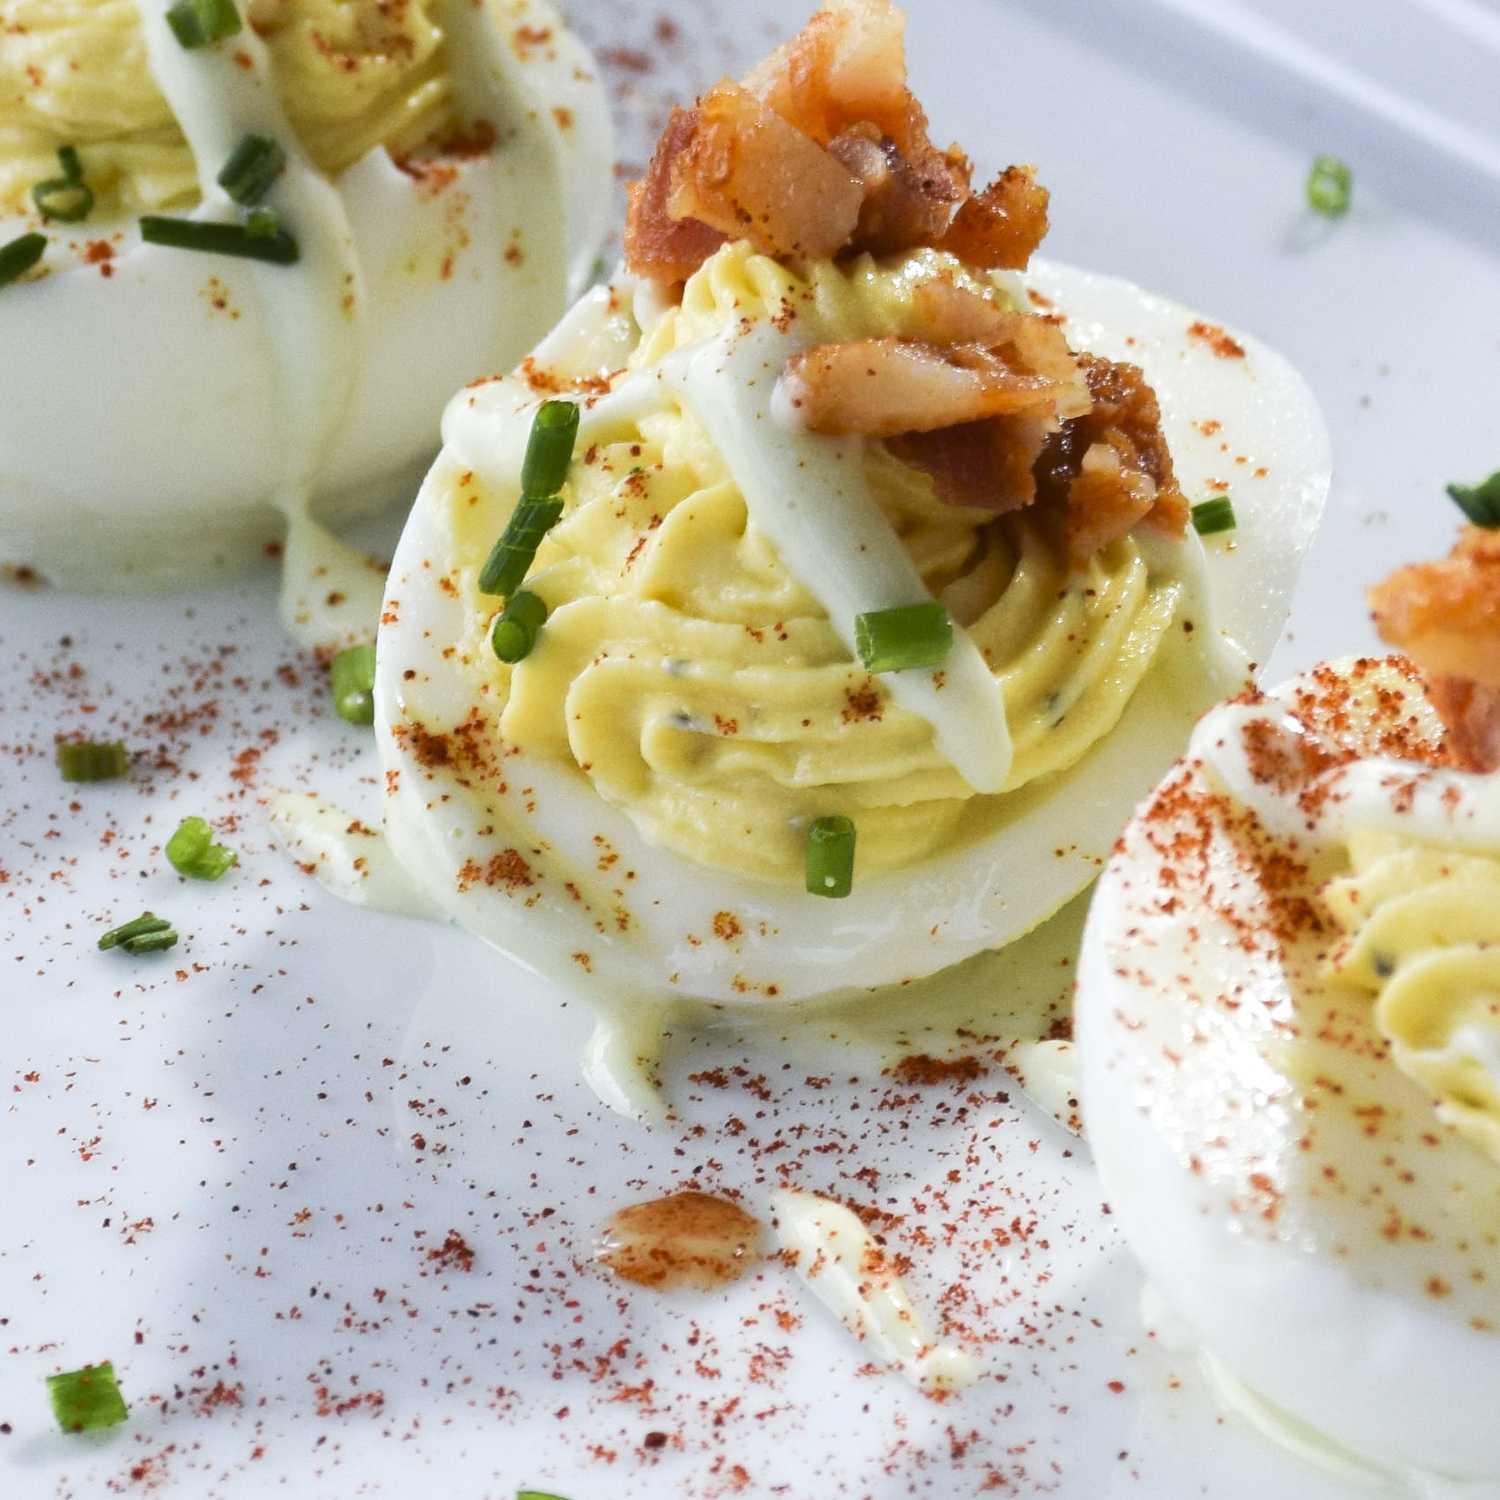 S&M’s deviled eggs may look like typical picnic fare, but the wasabi aioli and the spicy-sweet combination of honey Sriracha bacon make this appetizer stand out from the pack. Photo credit: Lauren J. Mapp